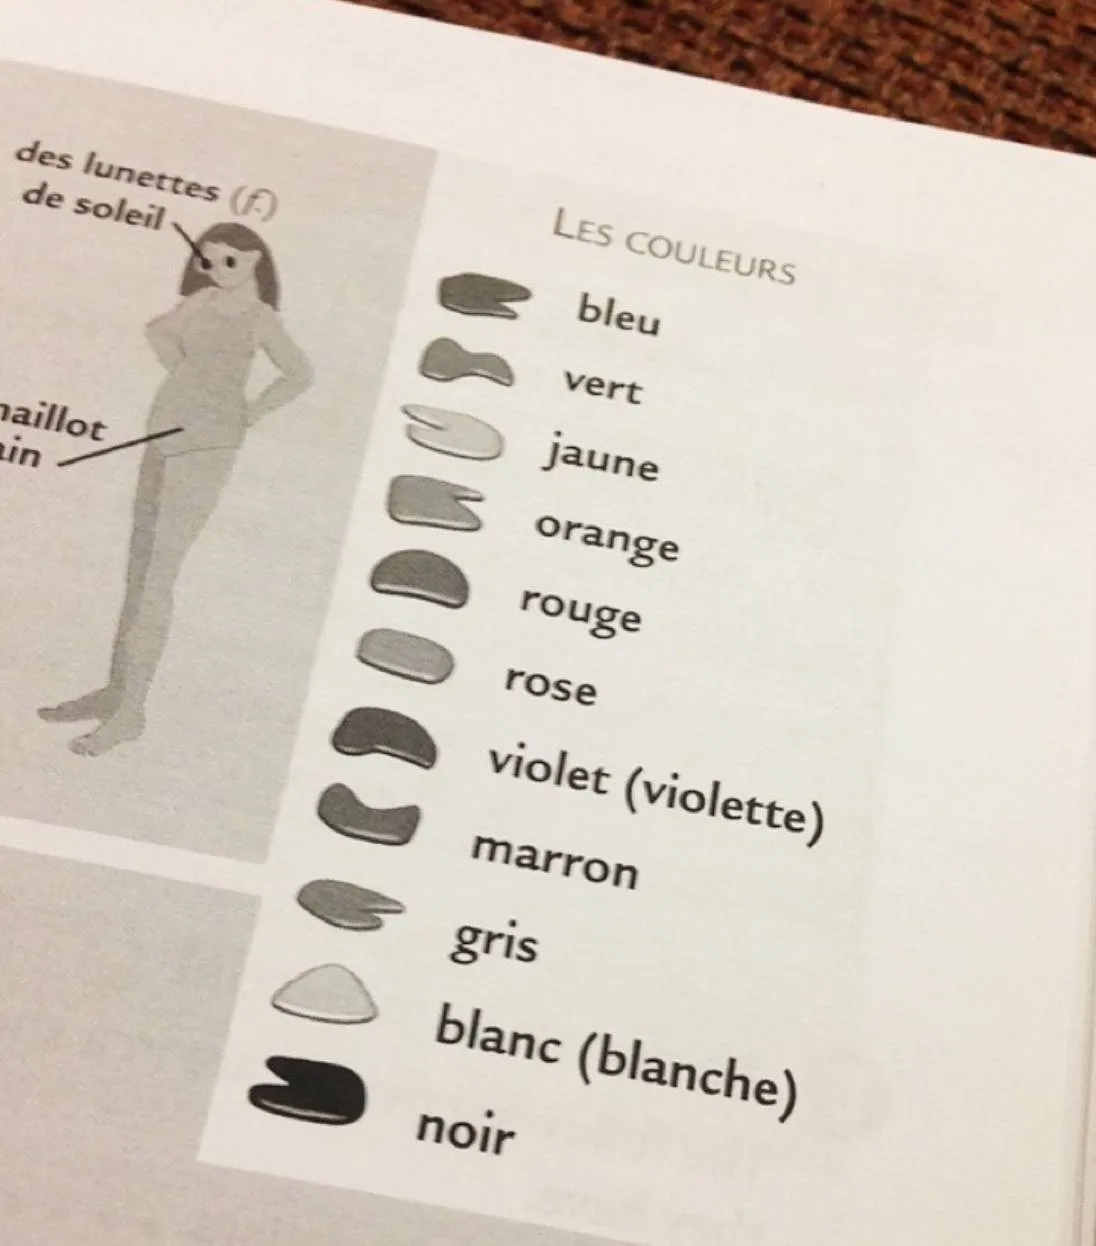 A French textbook labels the colors, but it was printed in black and white.